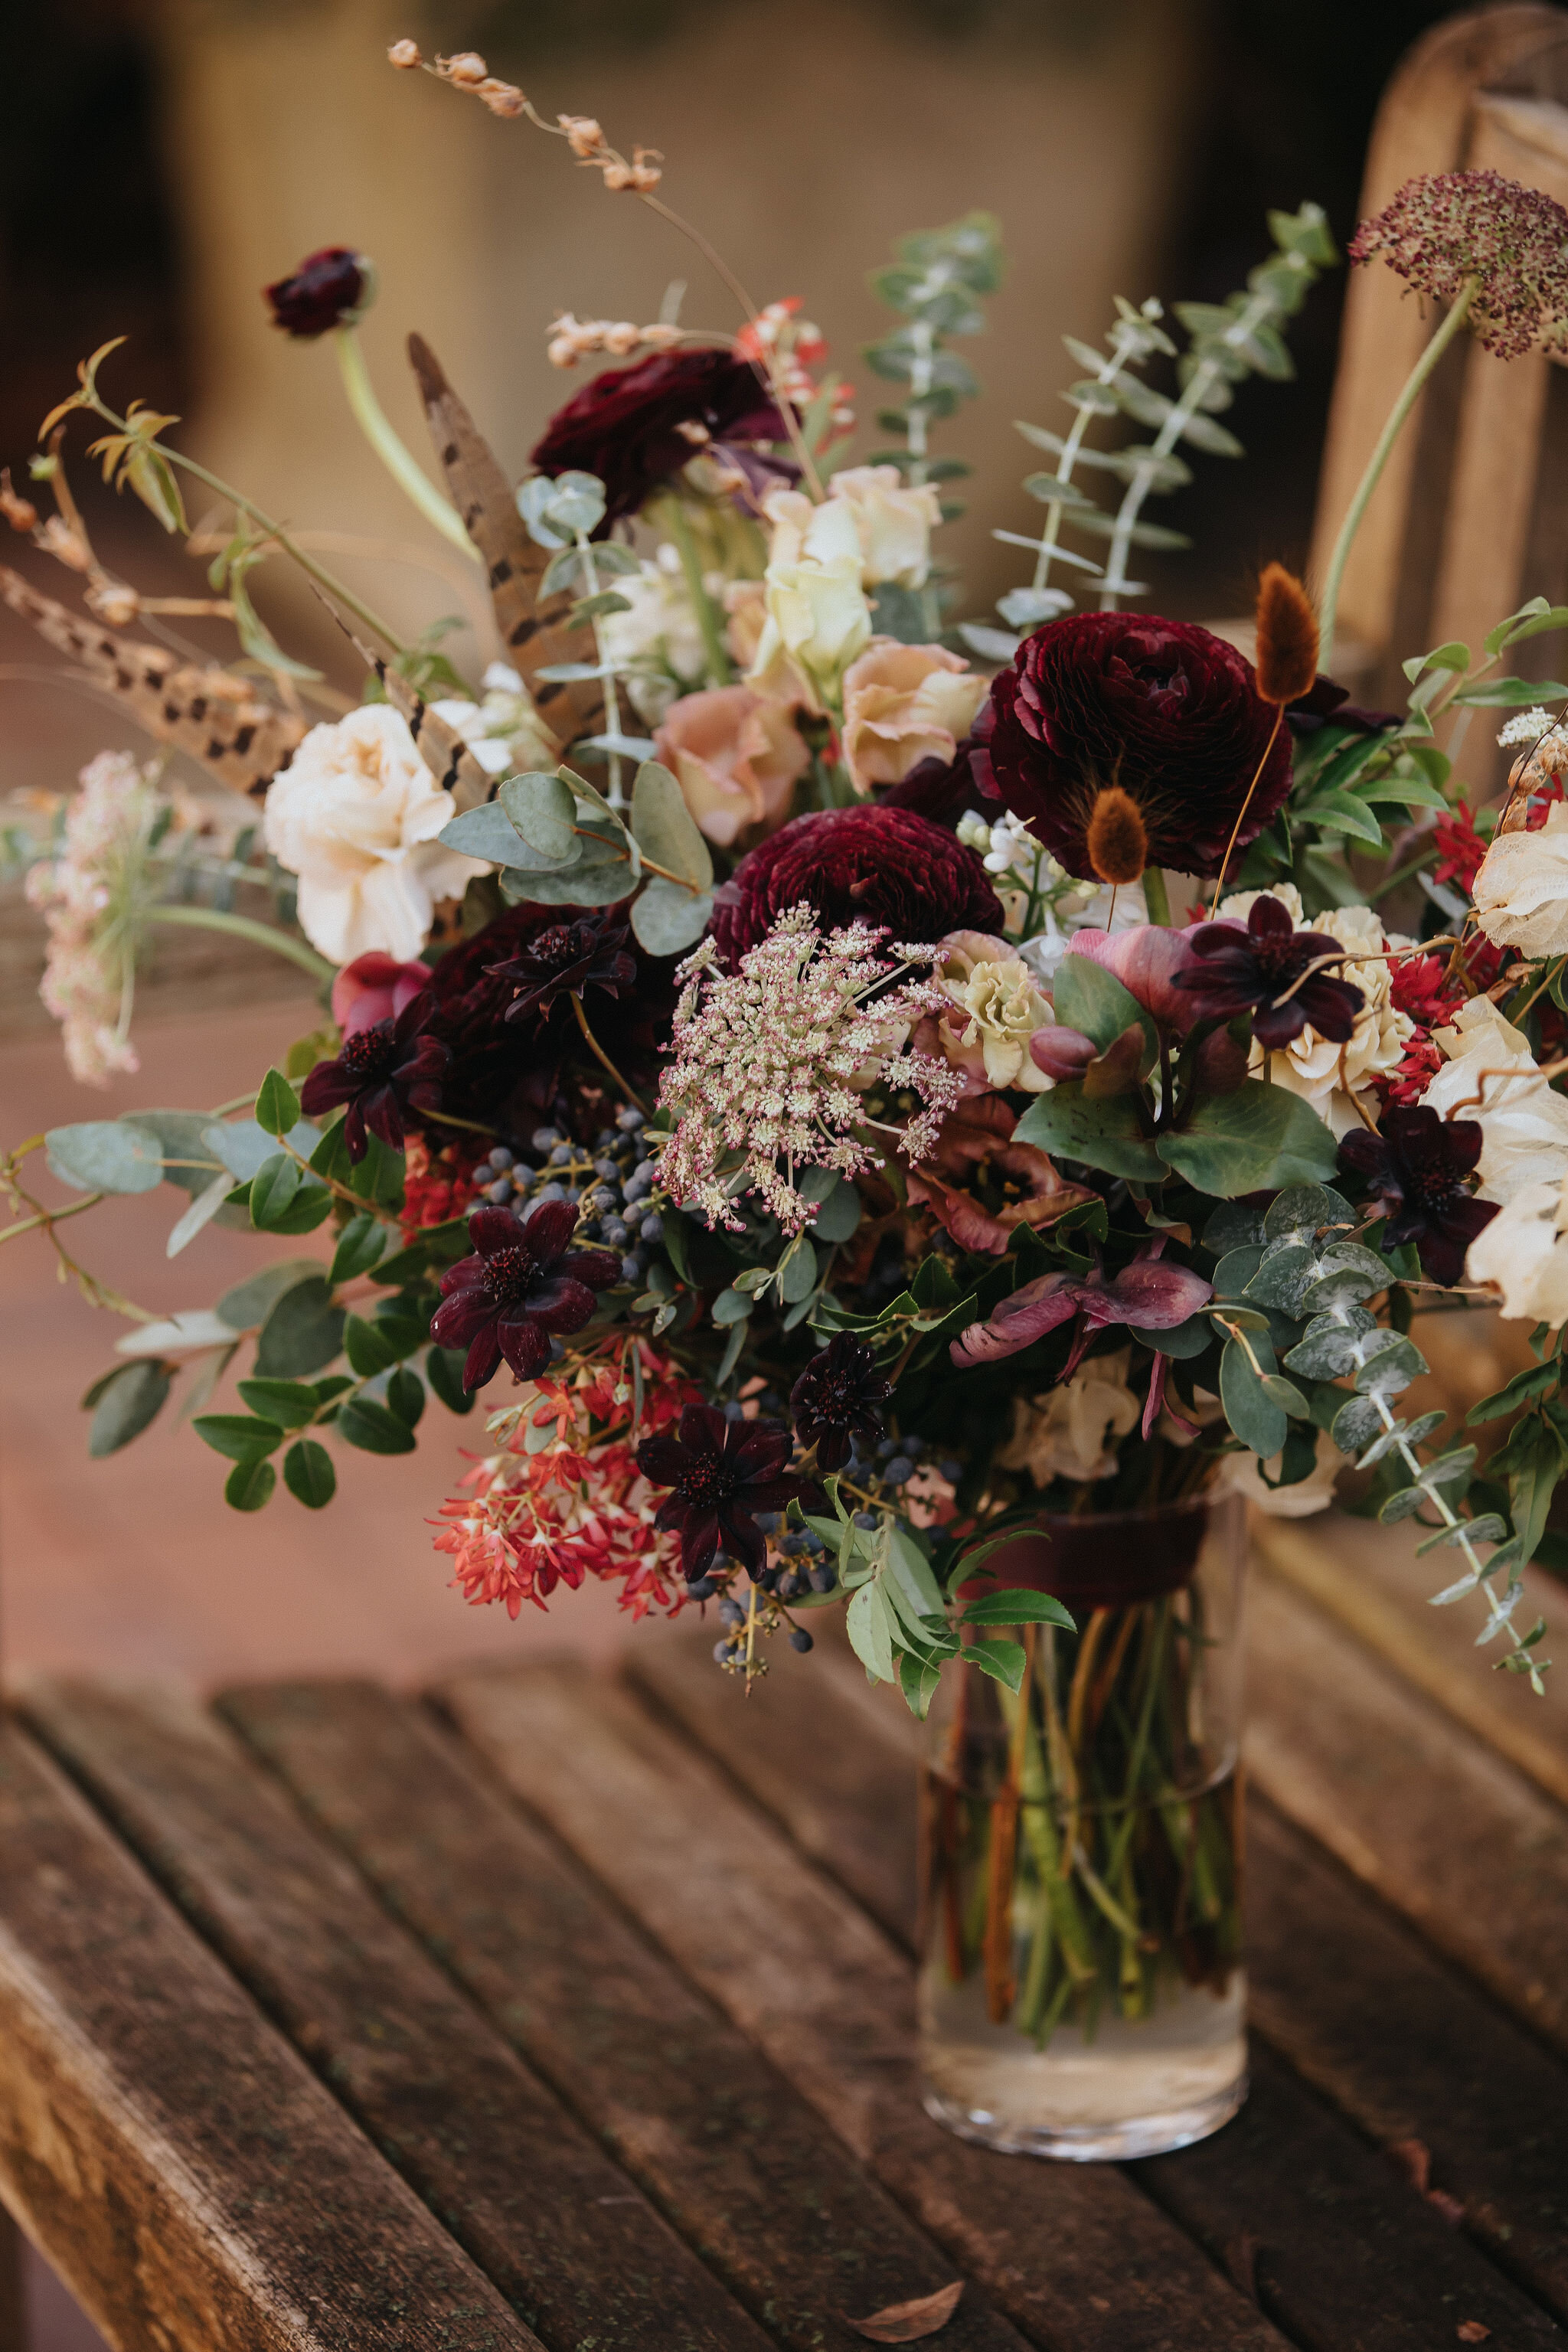 A perfect botanical and moody bouquet filled with Chocolate Cosmos, Queen Ann's Lace, Baby Eucalyptus, Rust Bunny Tails, Festival Bush, Antique Carnations, Burgundy Ranunculus, and Brown Lisianthus. Designed by Nashville wedding floral designer, Ros…